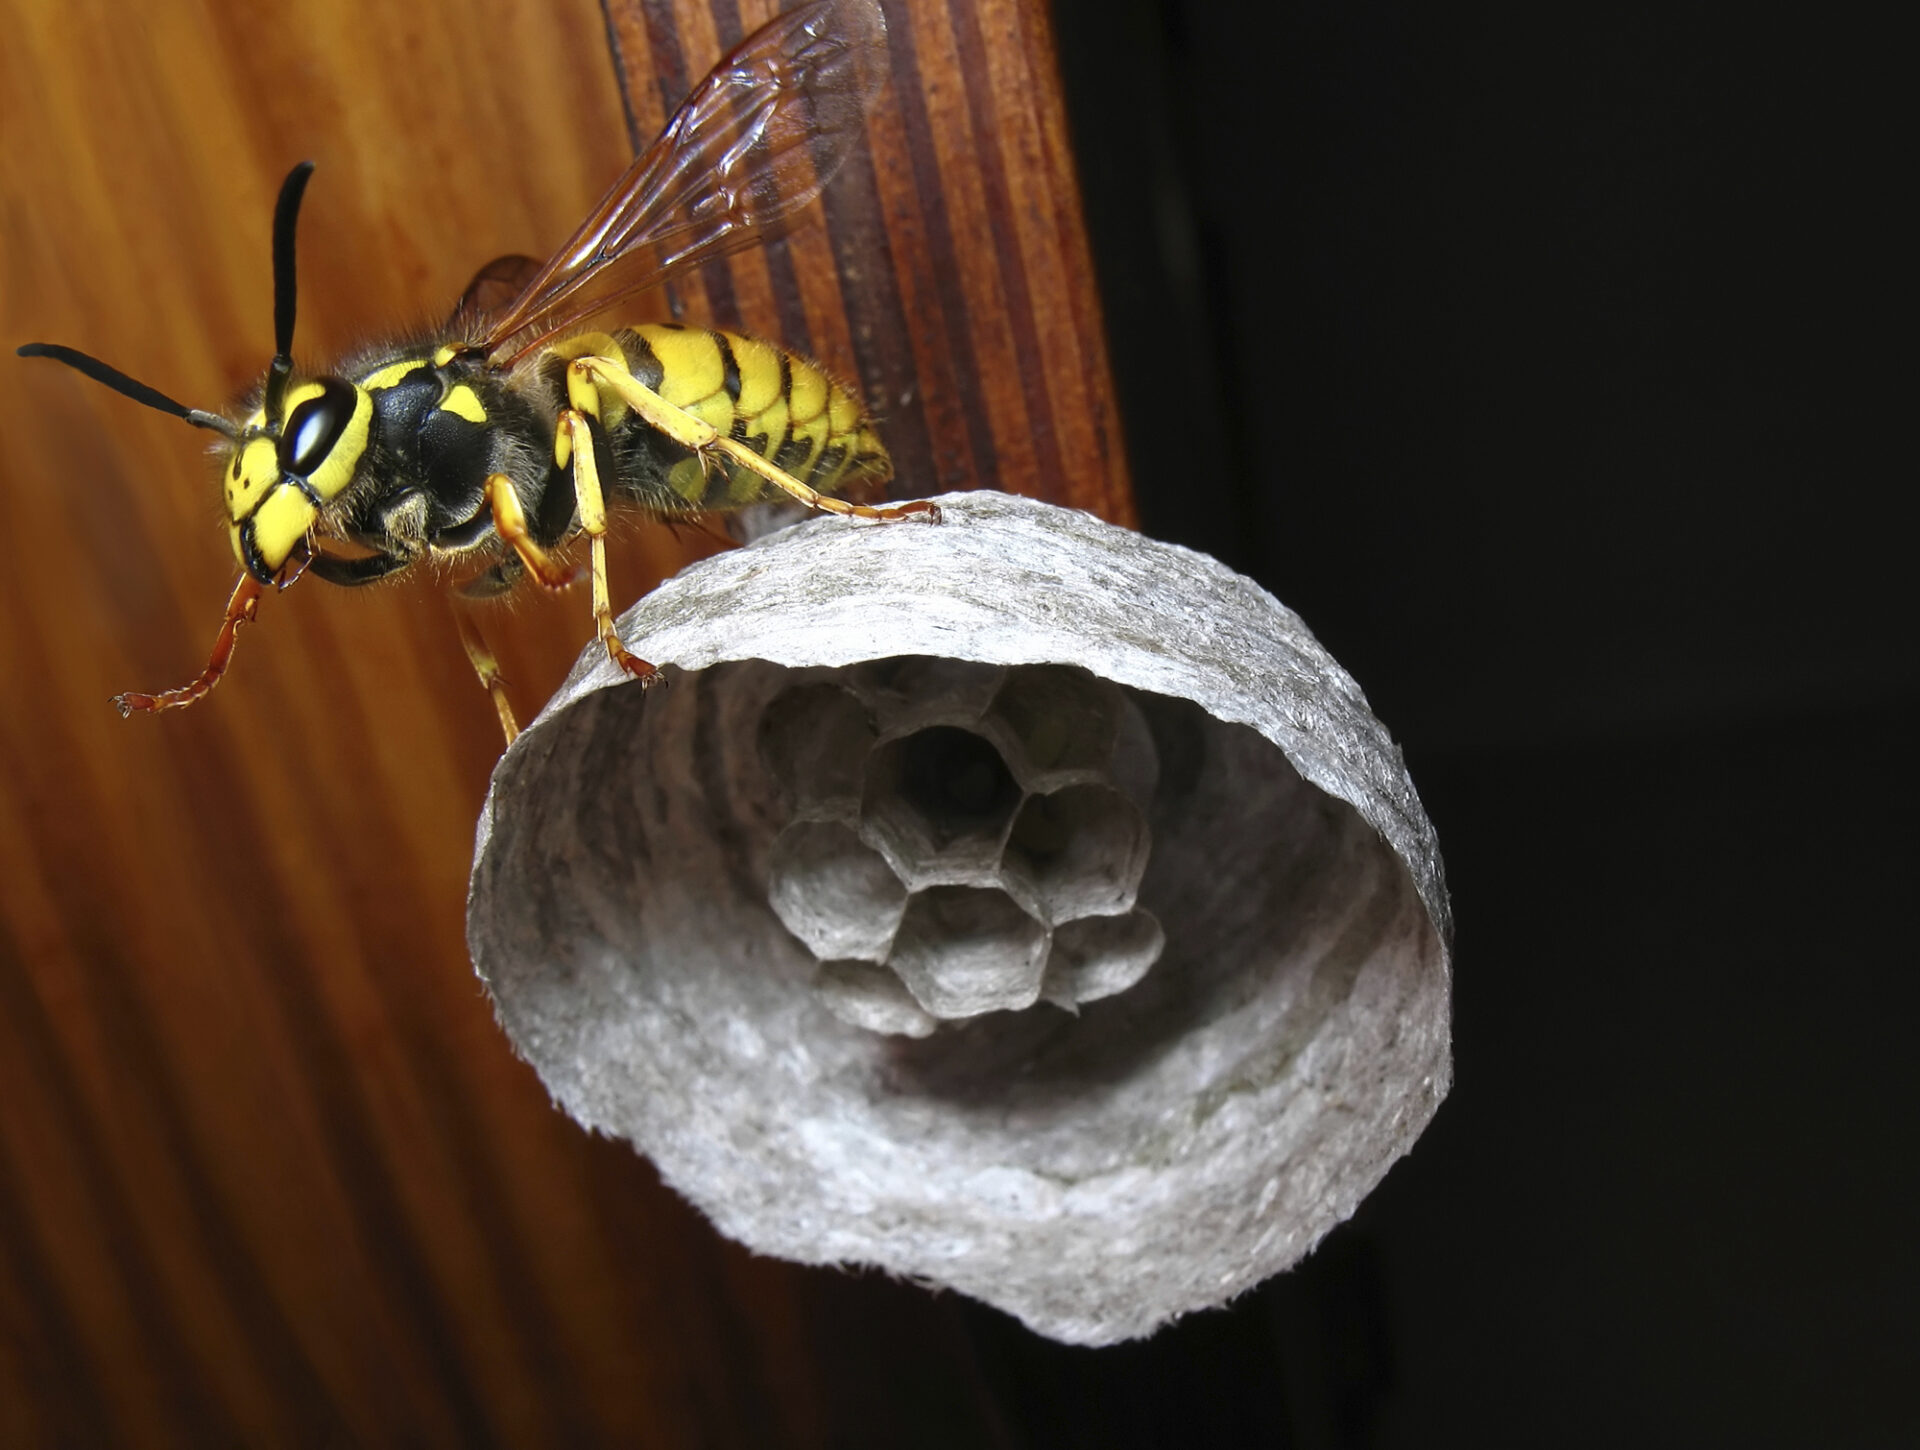 Yellowjacket nest in wall of house